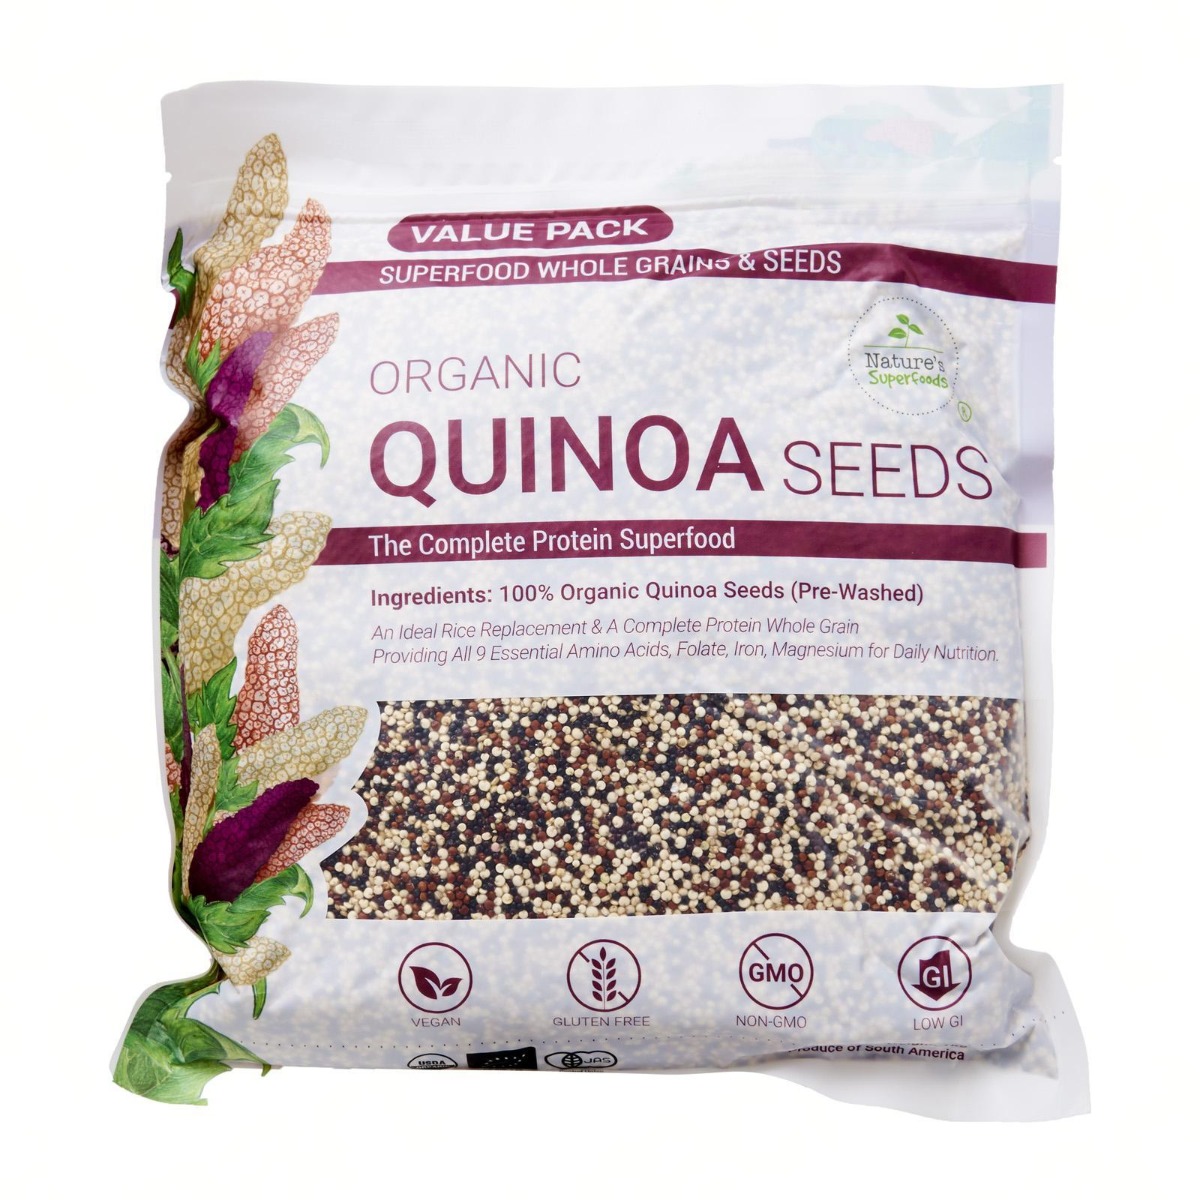 Organic Tricolor Quinoa Seeds -1kg resealable pack front